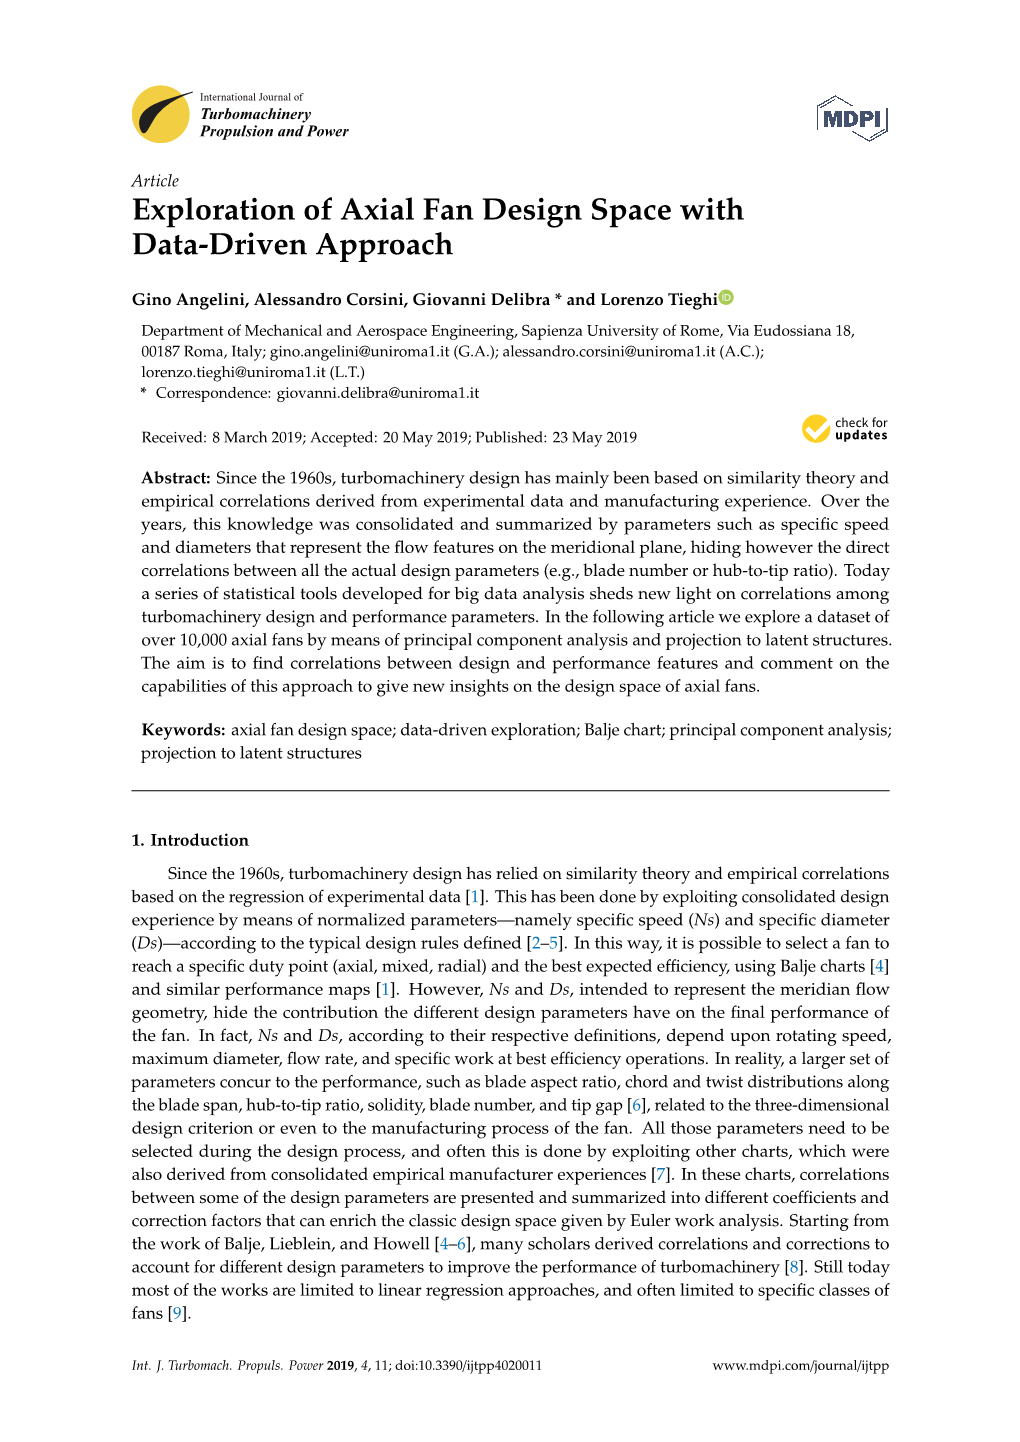 Exploration of Axial Fan Design Space with Data-Driven Approach